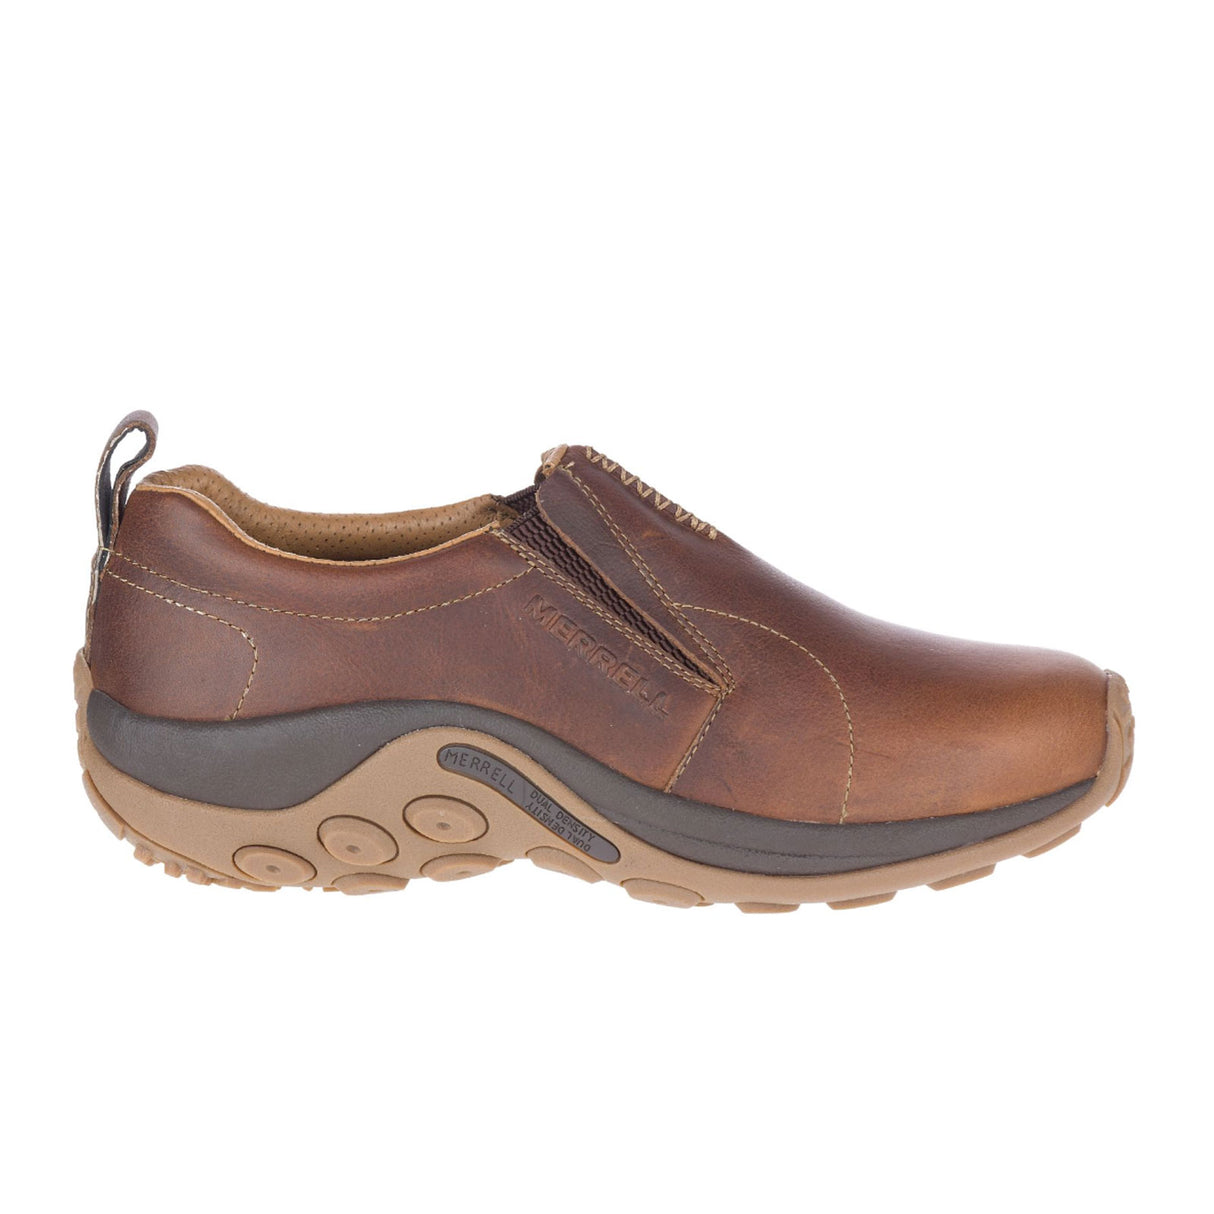 Merrell Jungle Moc Crafted Slip On (Men) - Peanut Dress-Casual - Slip Ons - The Heel Shoe Fitters